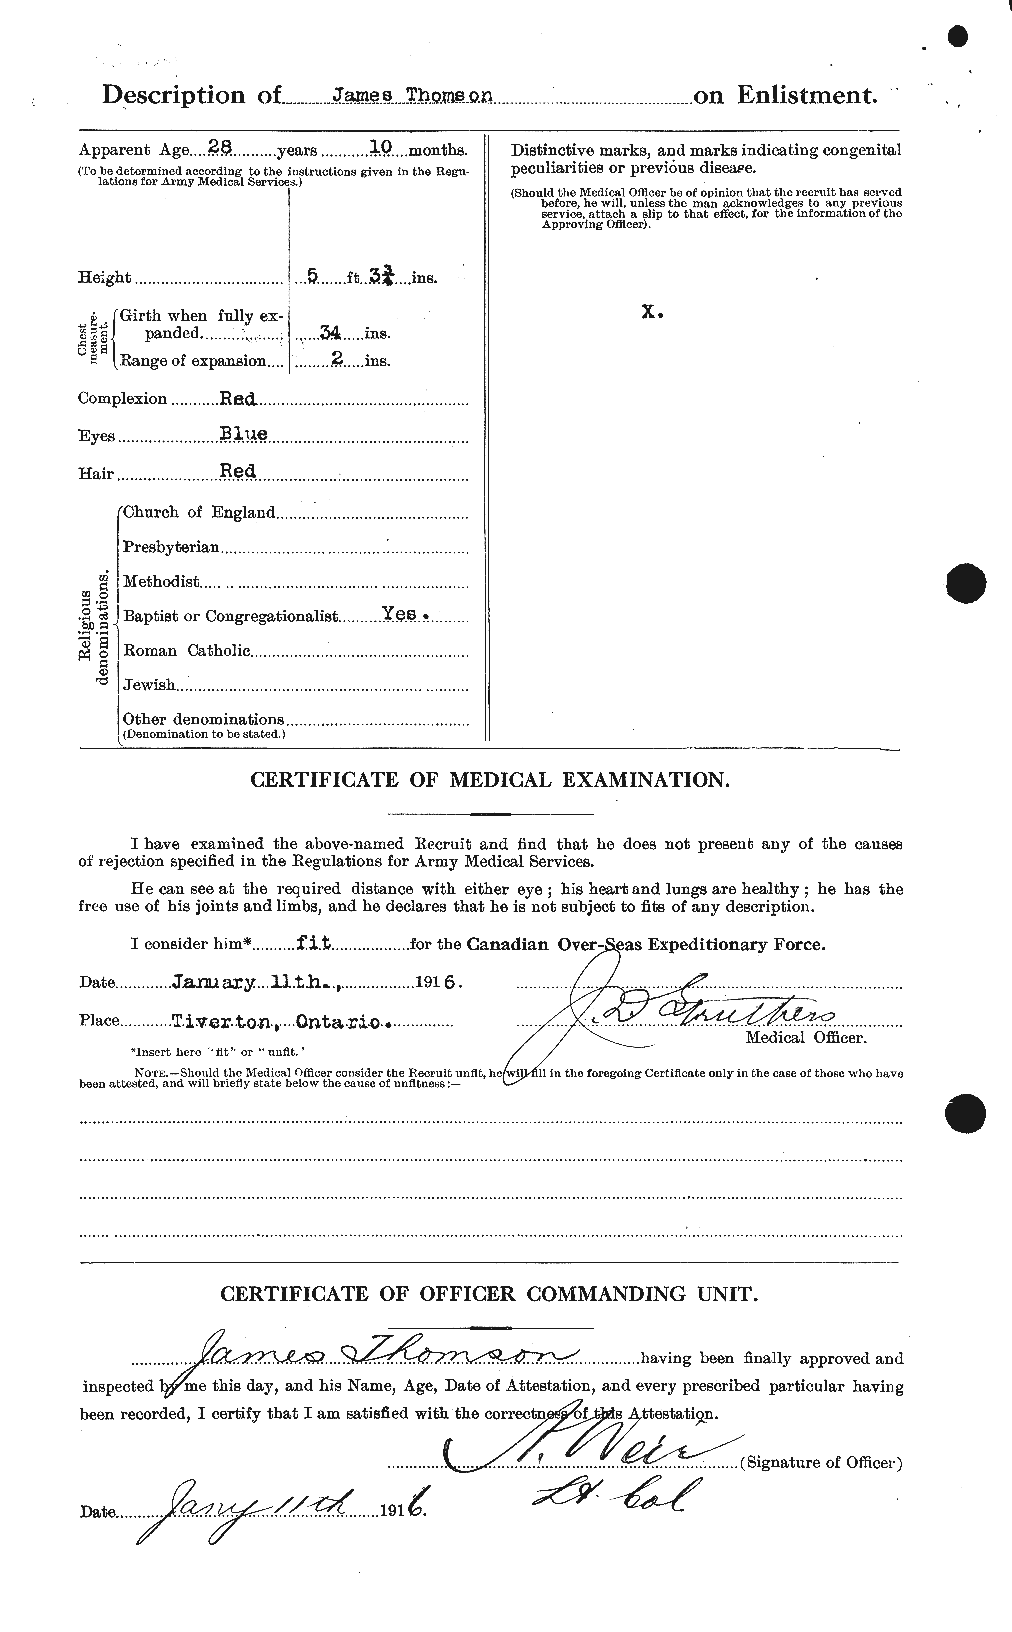 Personnel Records of the First World War - CEF 633799b